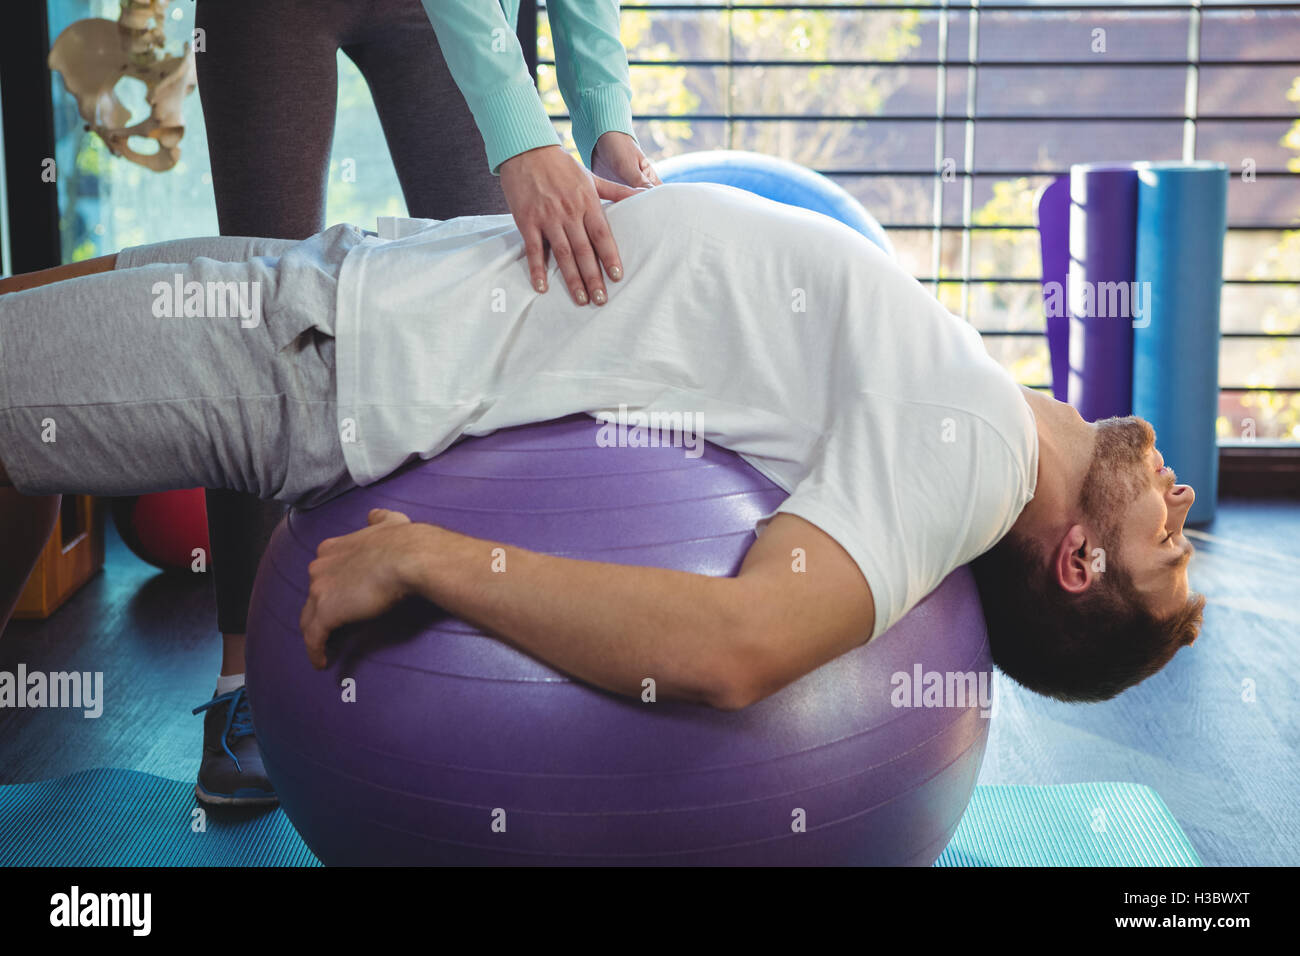 Female physiotherapist helping male patient on exercise ball Stock Photo